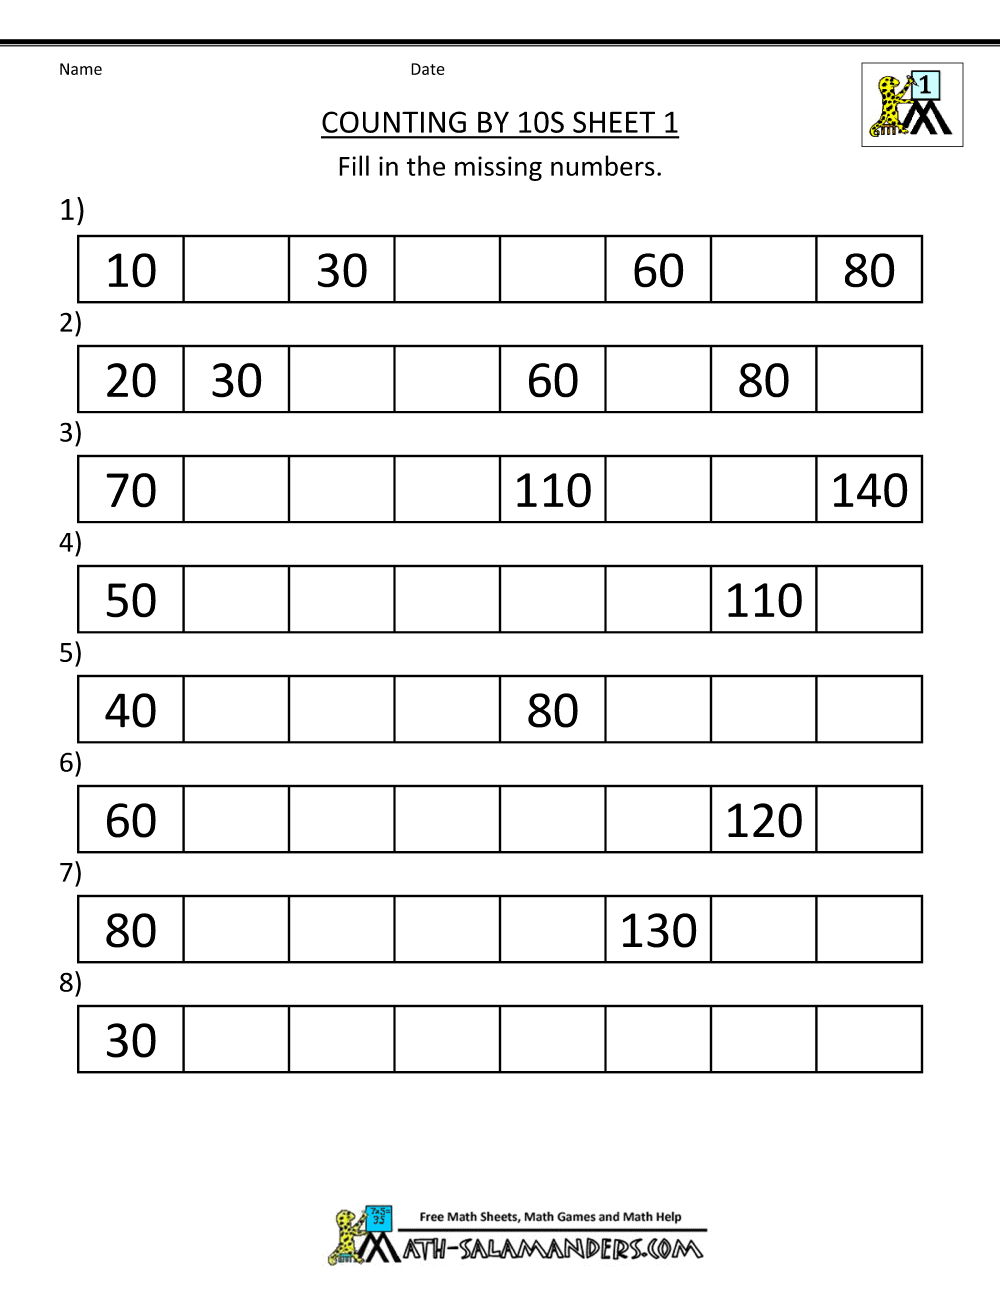 1111st Grade Math Worksheets Counting by 1111s 11s and 11111s For Counting By 10s Worksheet